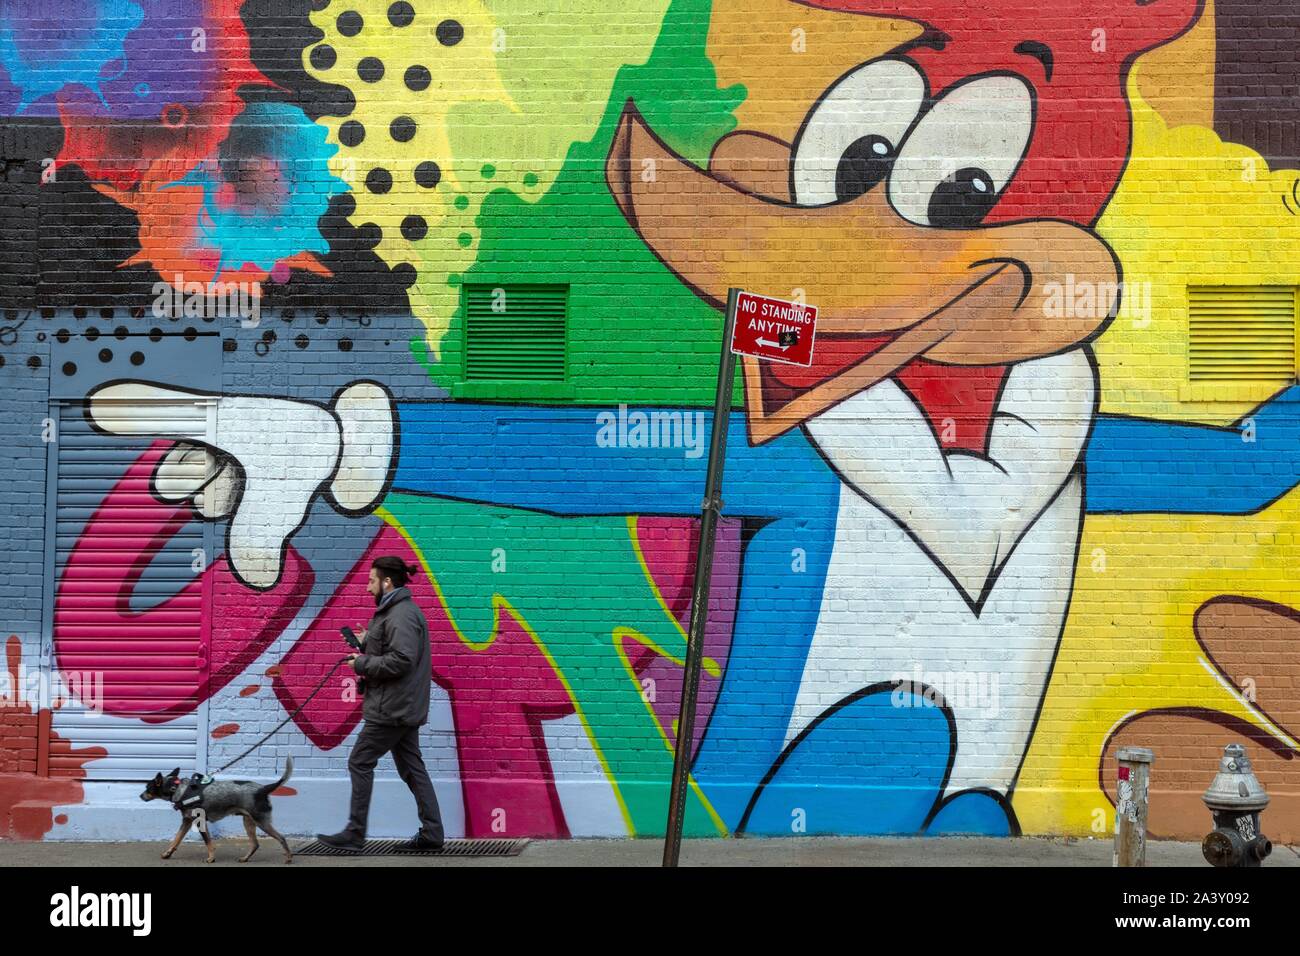 MAN AND HIS DOG IN FRONT OF AN EPHEMERAL MURAL, LITTLE ITALY, MANHATTAN, NEW YORK, UNITED STATES, USA Stock Photo